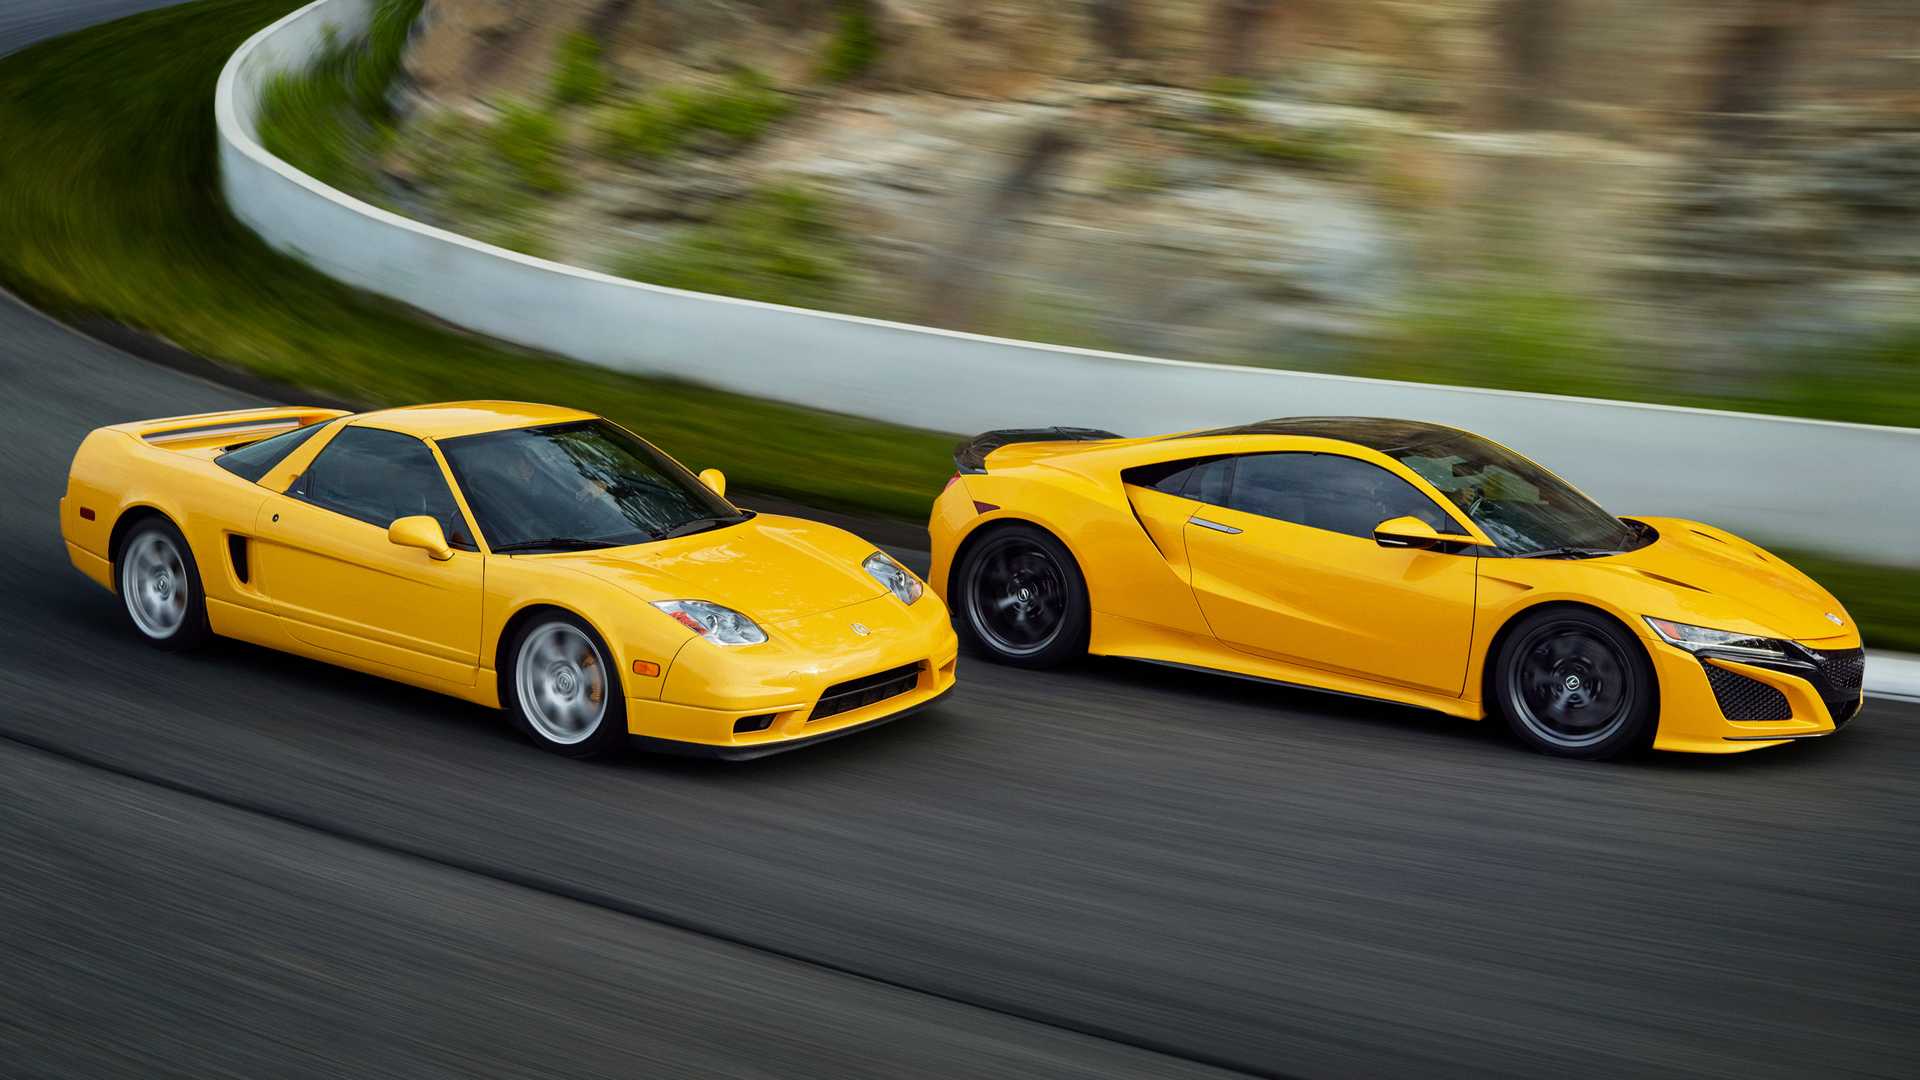 2020-acura-nsx-indy-yellow-pearl-and-original-nsx-spa-yellow